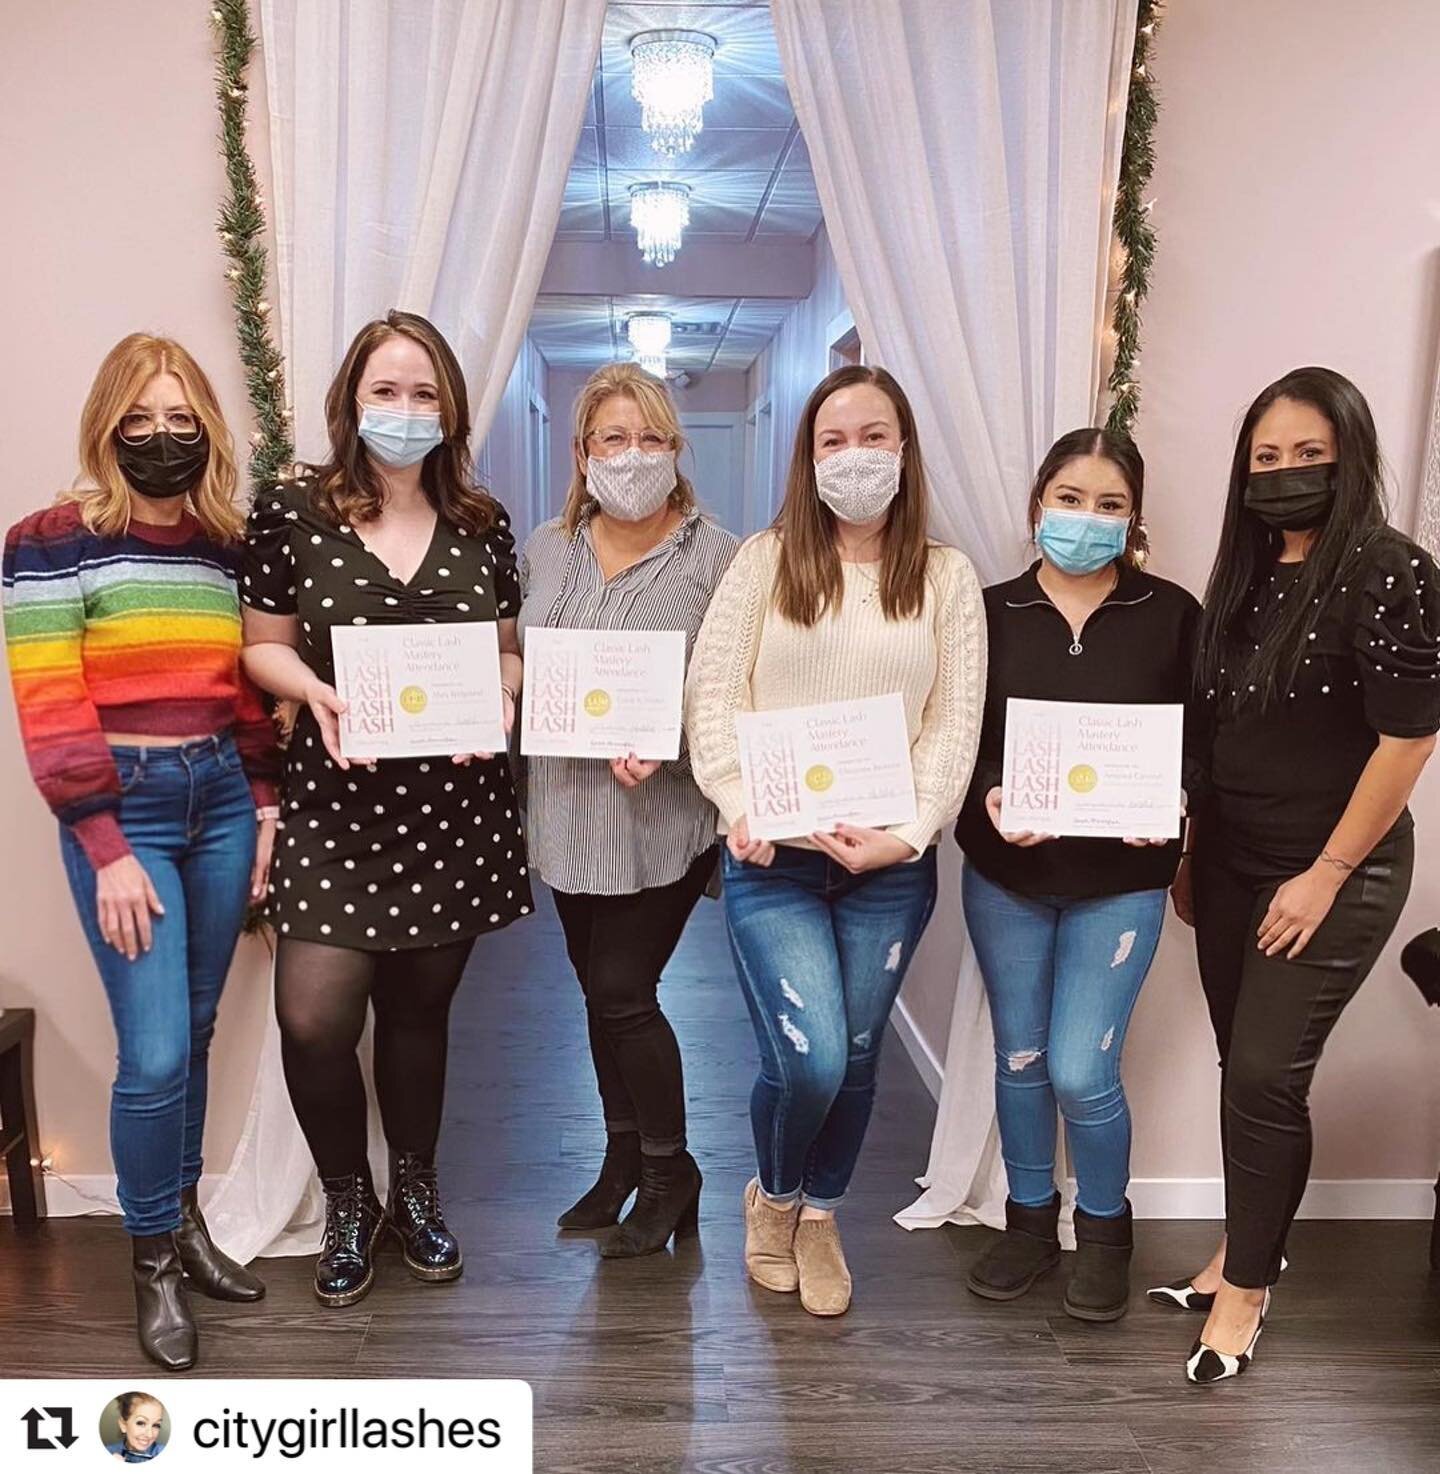 #Repost @citygirllashes with @make_repost

𝗦𝗽𝗿𝗲𝗮𝗱 𝘁𝗵𝗲 𝗸𝗻𝗼𝘄𝗹𝗲𝗱𝗴𝗲-𝗦𝗽𝗿𝗲𝗮𝗱 𝘁𝗵𝗲 𝘄𝗲𝗮𝗹𝘁𝗵!
・・・

Lash Artists in the making. These girls blew me away this weekend with their eagerness and desire to learn. We can&rsquo;t wait t